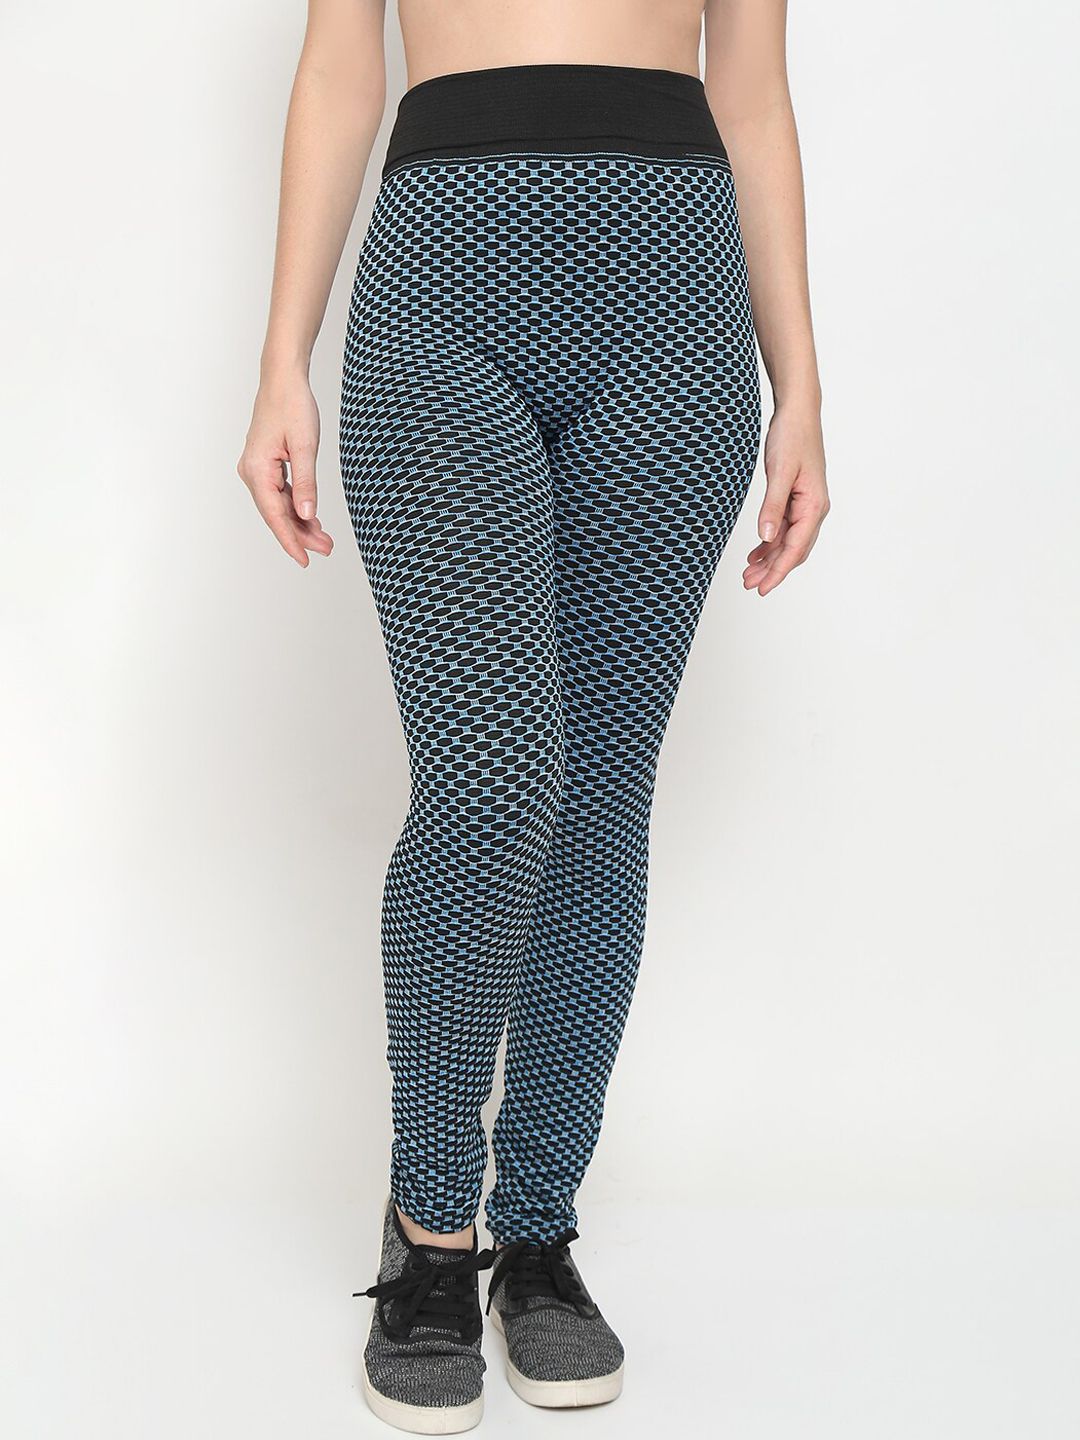 GRACIT Women Blue Patterned High-Rise Tights Price in India